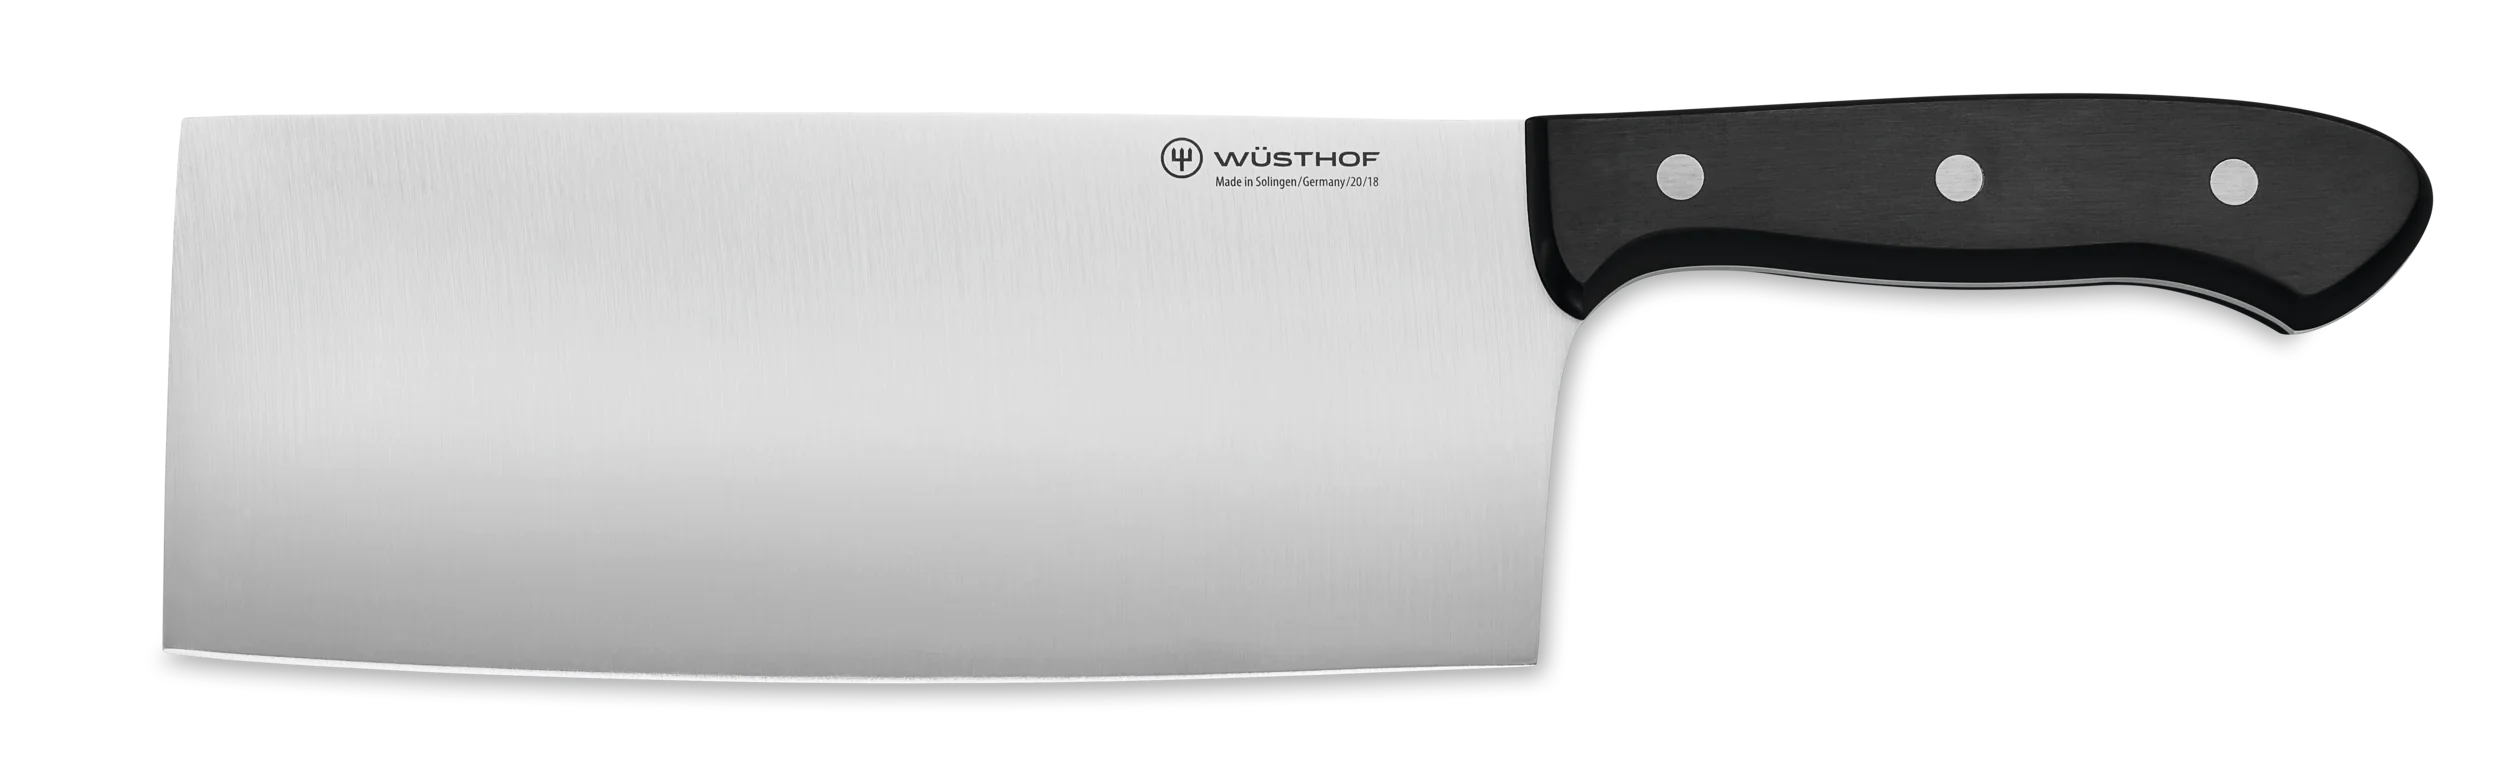 Wusthof 18cm Gourmet Chinese Chefs Knife SPECIAL OFFER